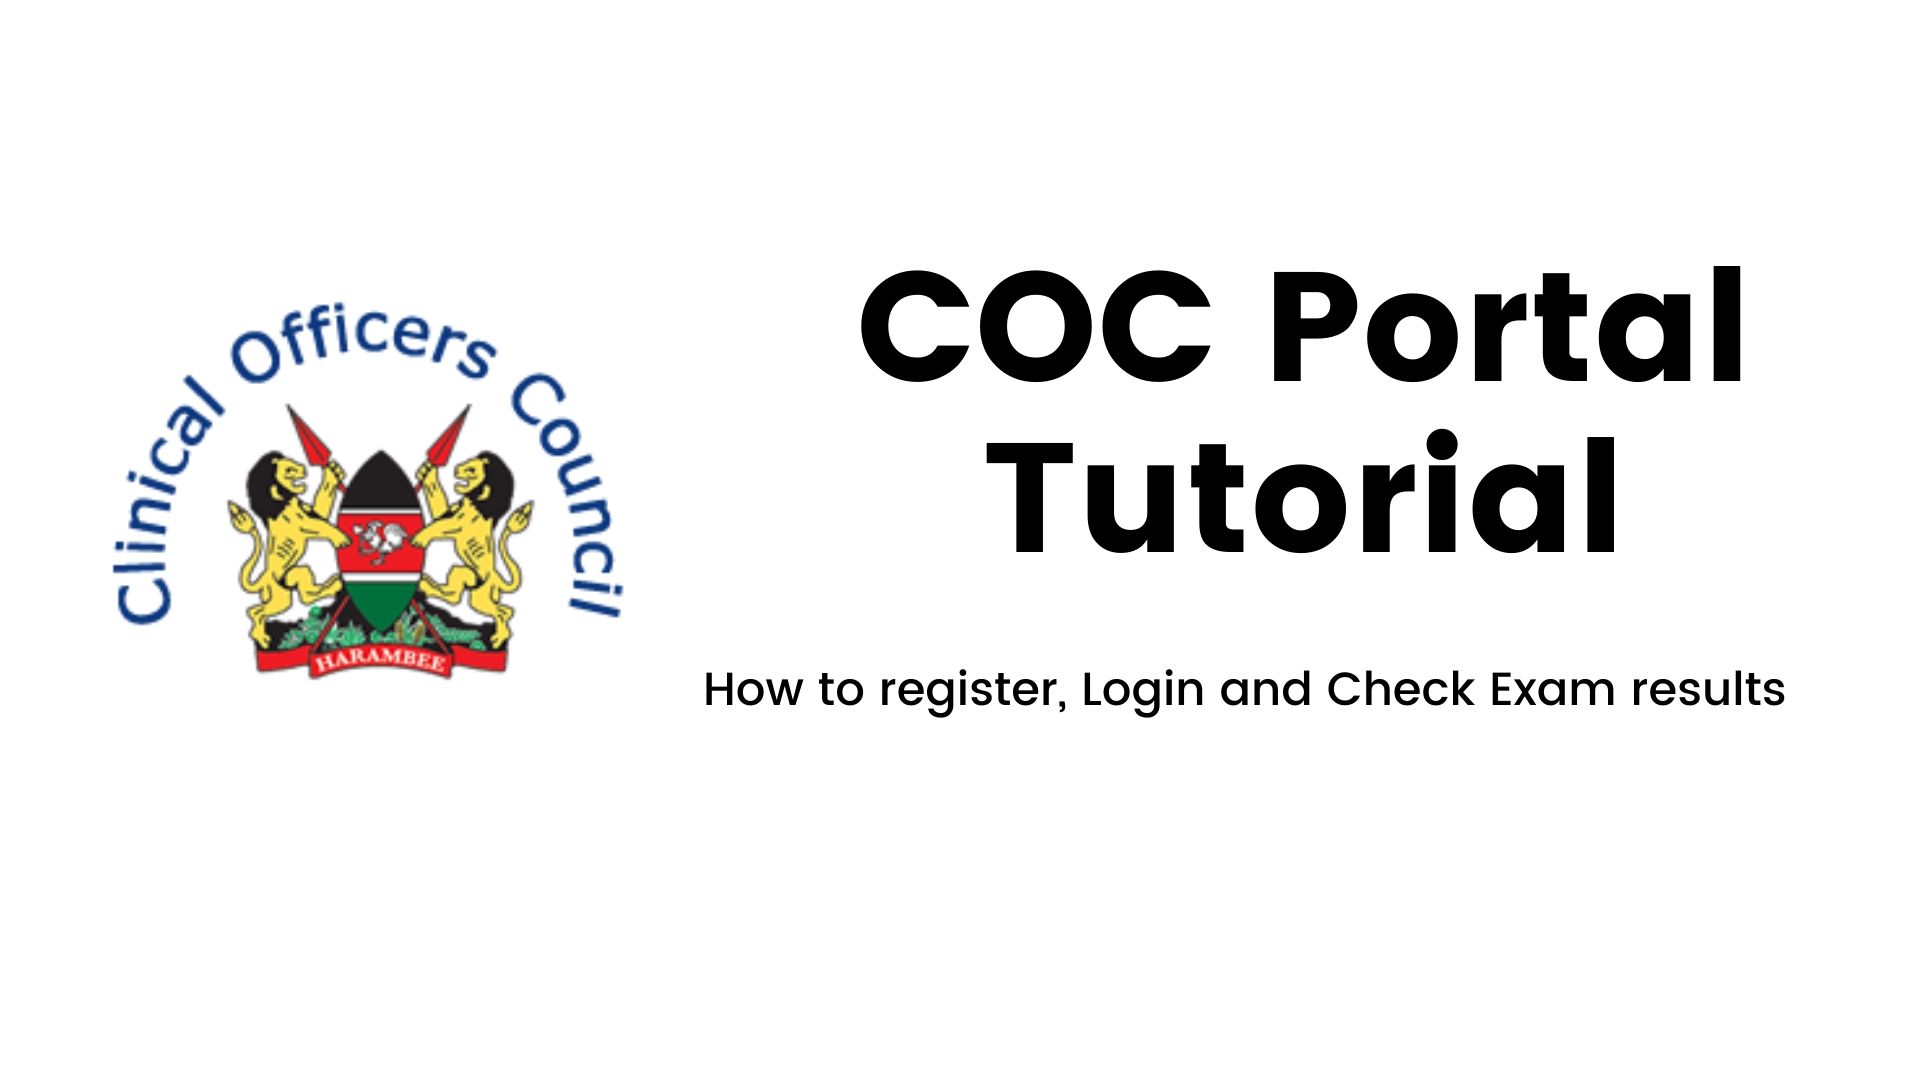 COC portal website Guide for Exam Registration, Results checking